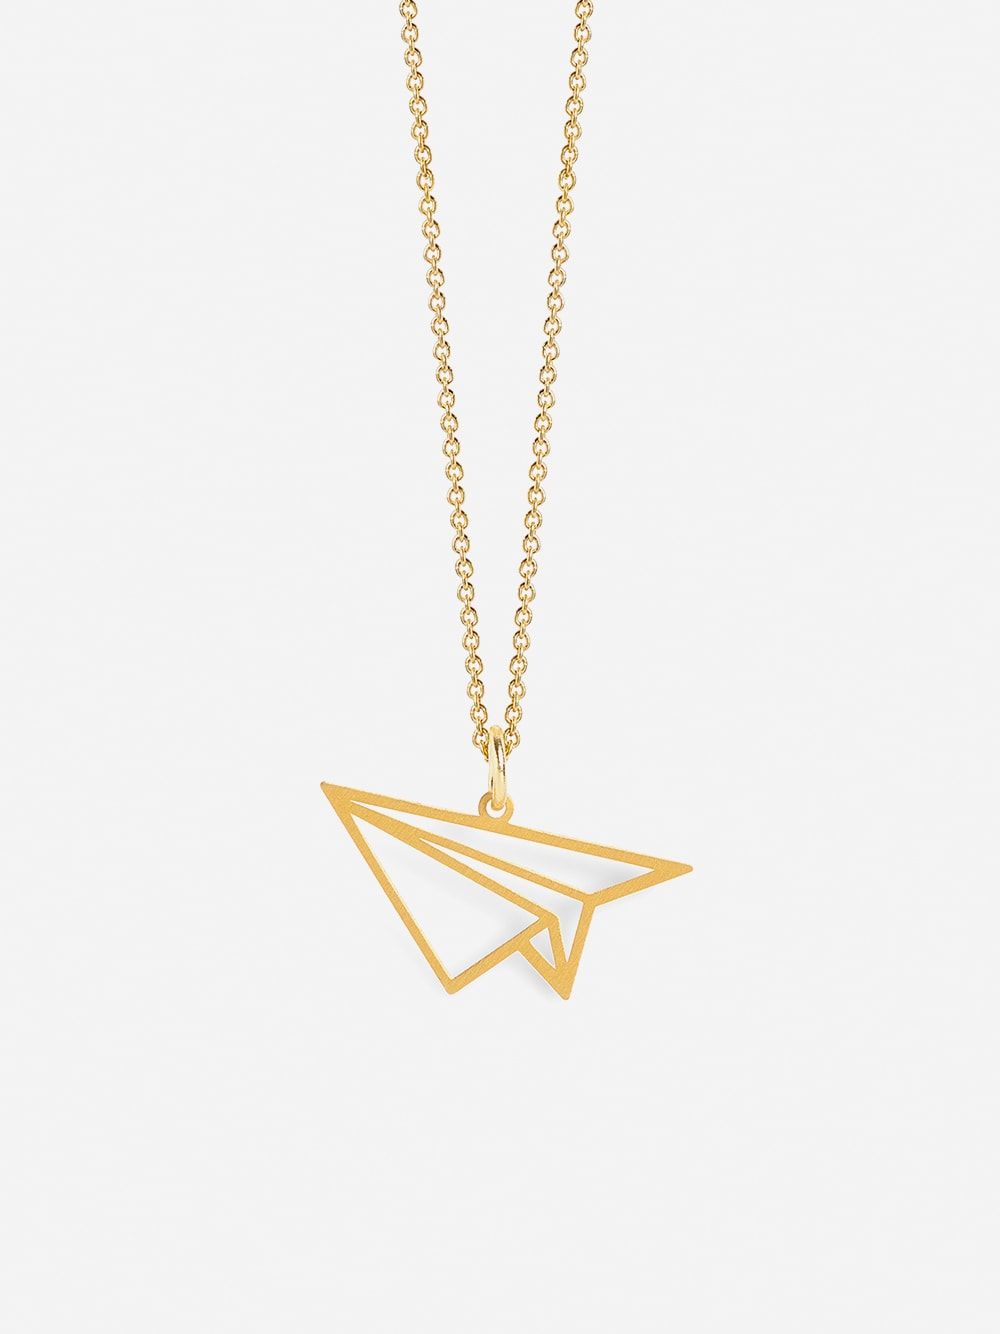 Golden Necklace Origami Airplane | Coquine Jewelry 